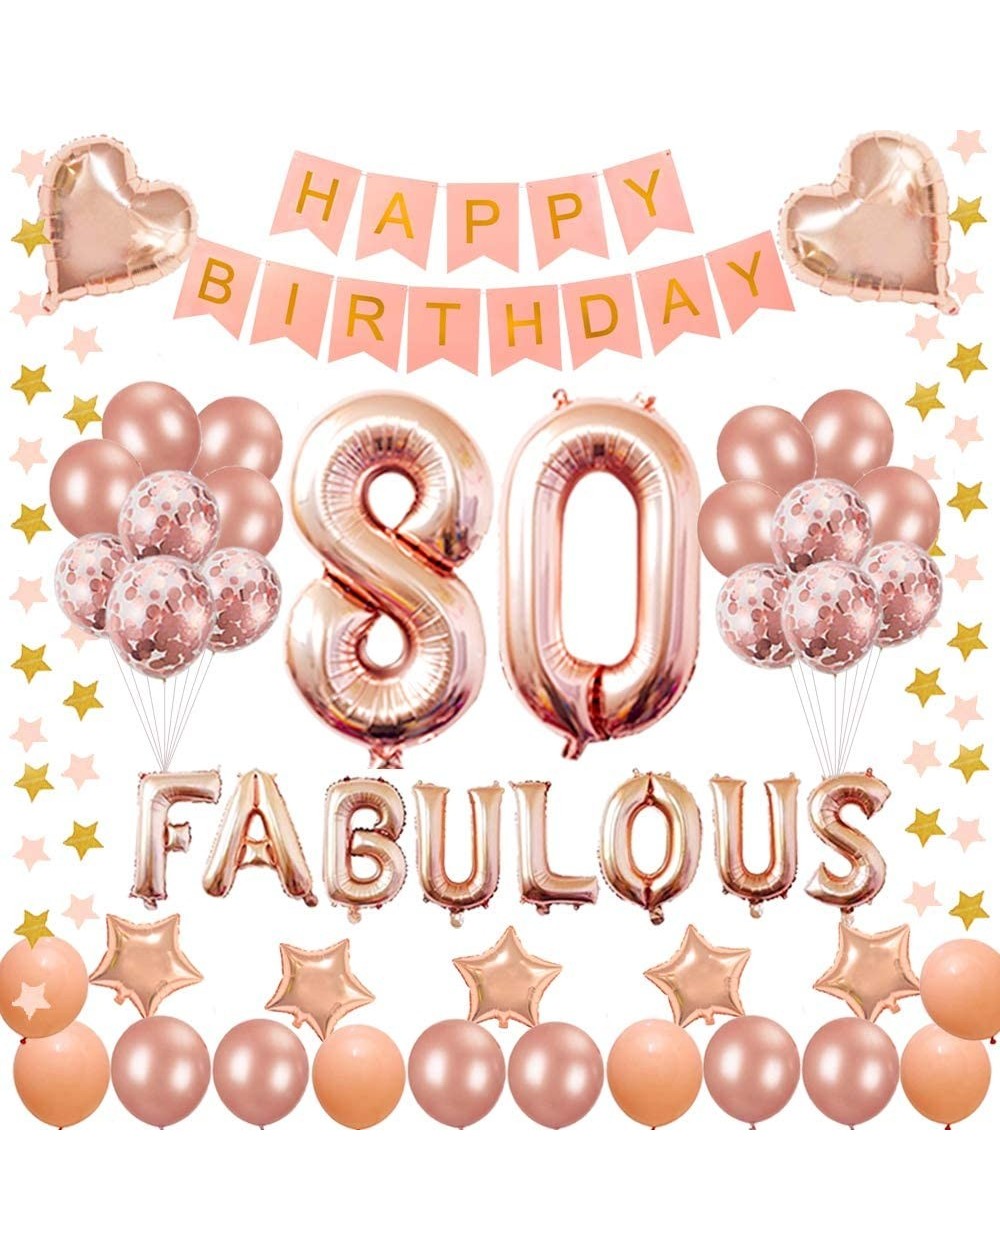 Balloons 80TH Birthday Decorations - for 80 Years Old Birthday Party Supplies pink Happy Birthday Banner Rose Gold Confetti b...